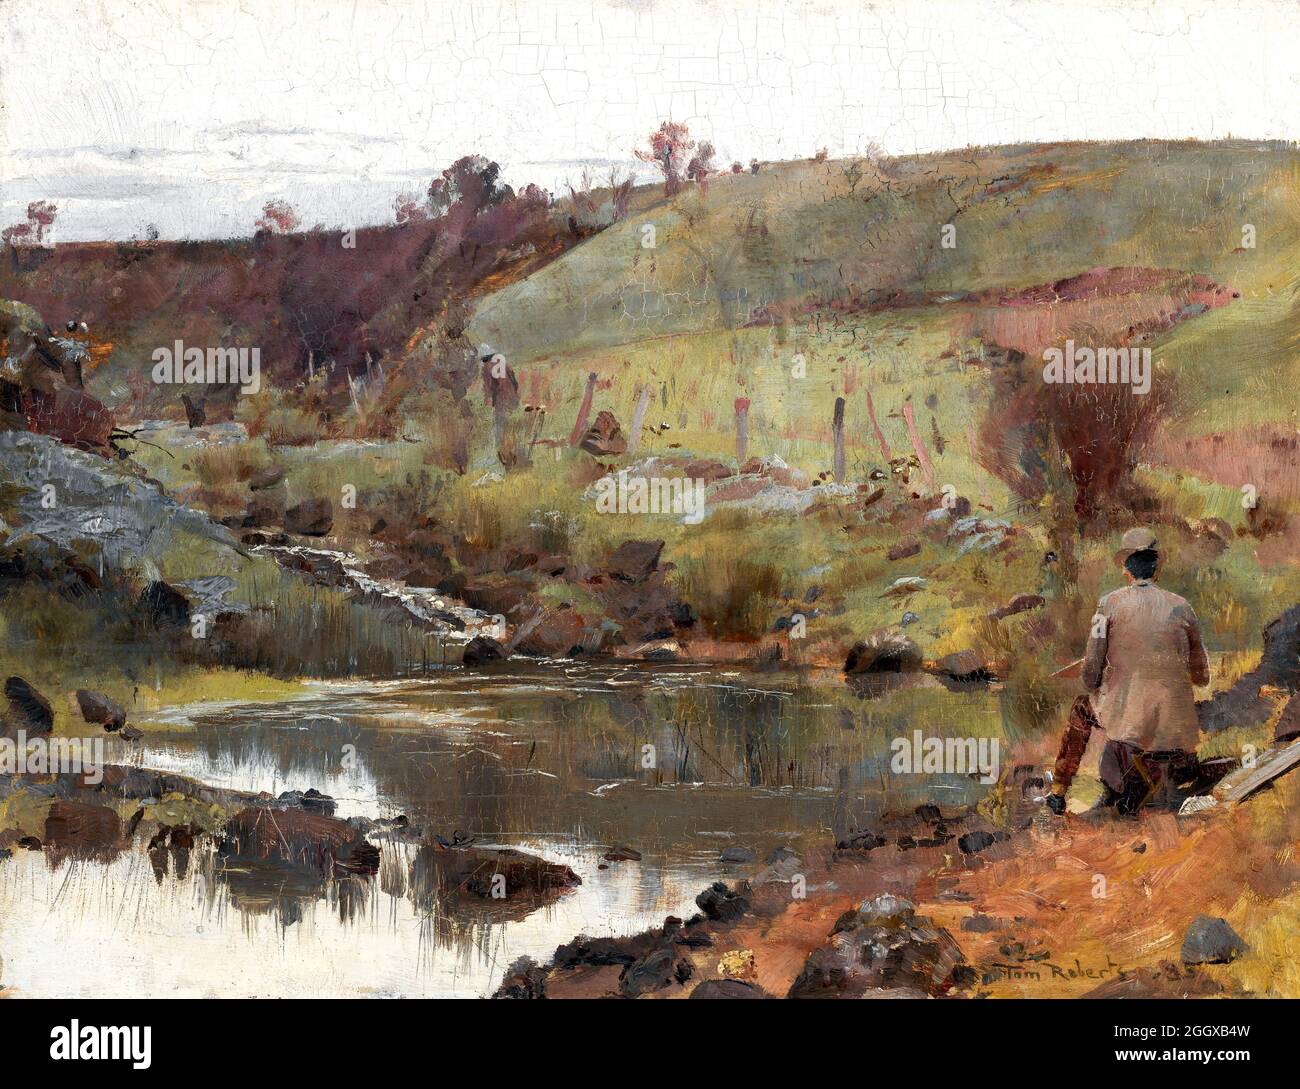 Tom Roberts. Painting entitled 'A Quiet Day on Darebin Creek' by Thomas William Roberts (1856-1931), oil on wood panel, 1885 Stock Photo